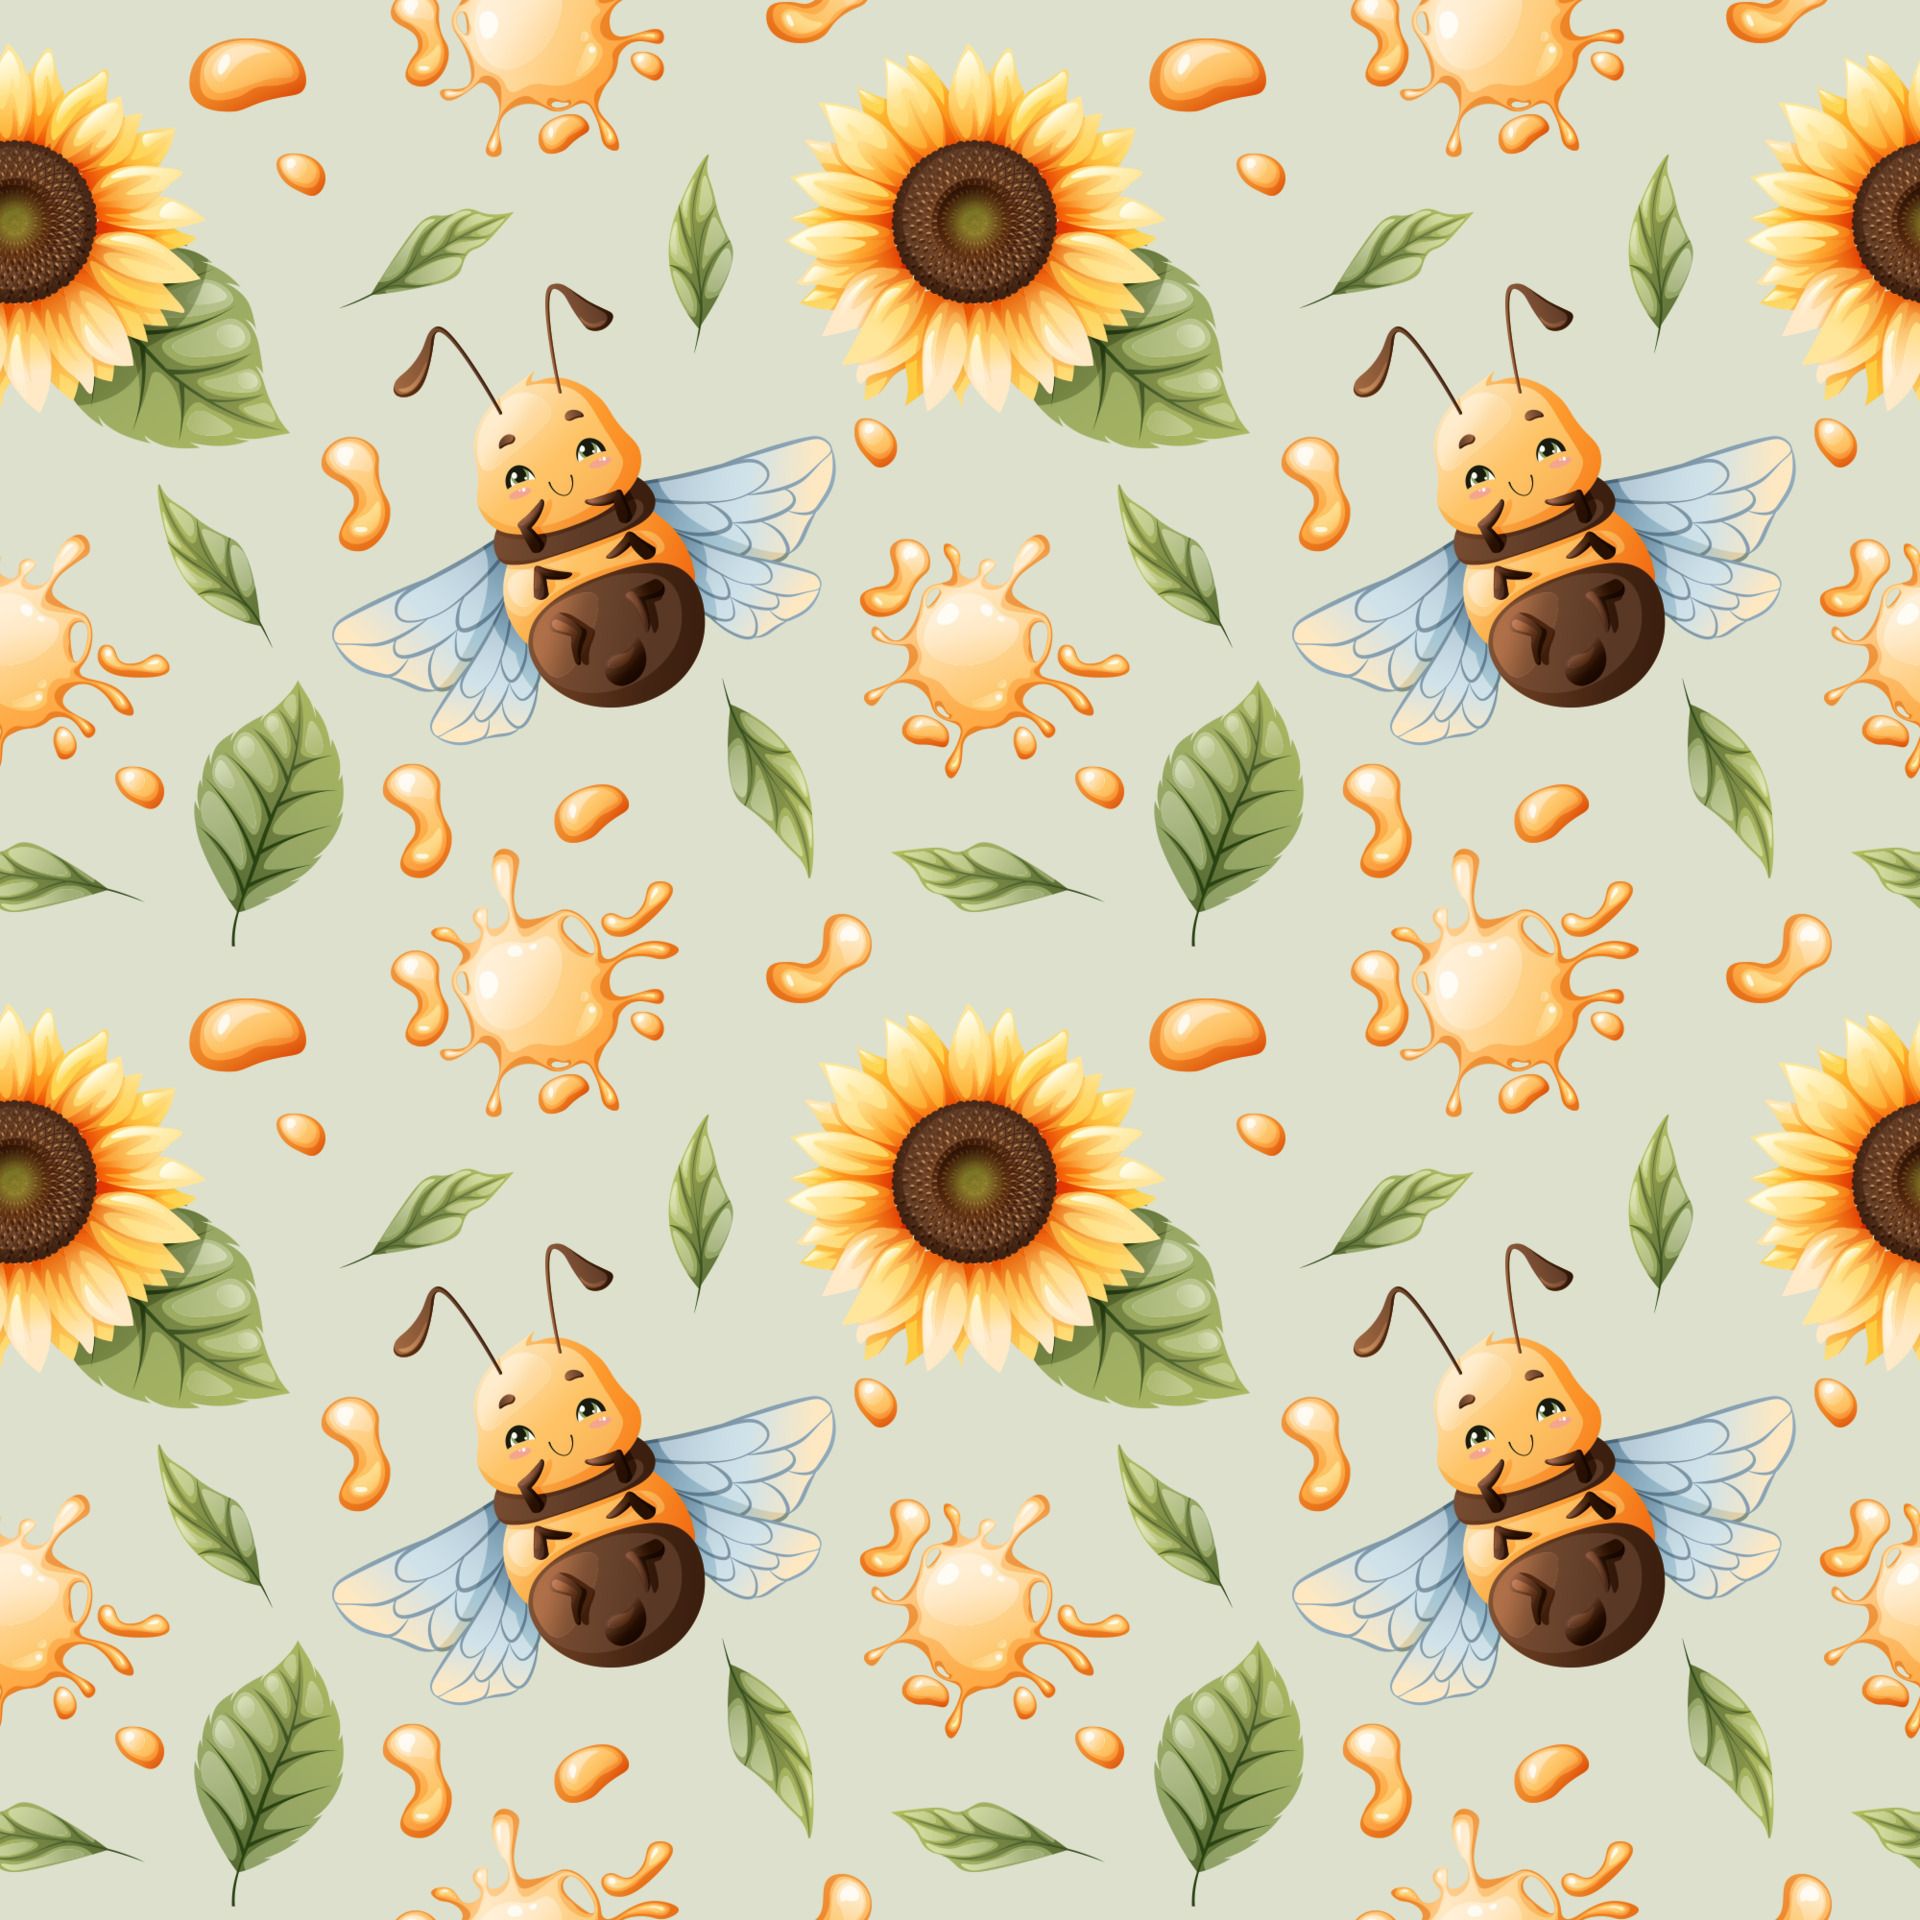 A pattern of bees, sunflowers, and honey. - Honey, fox